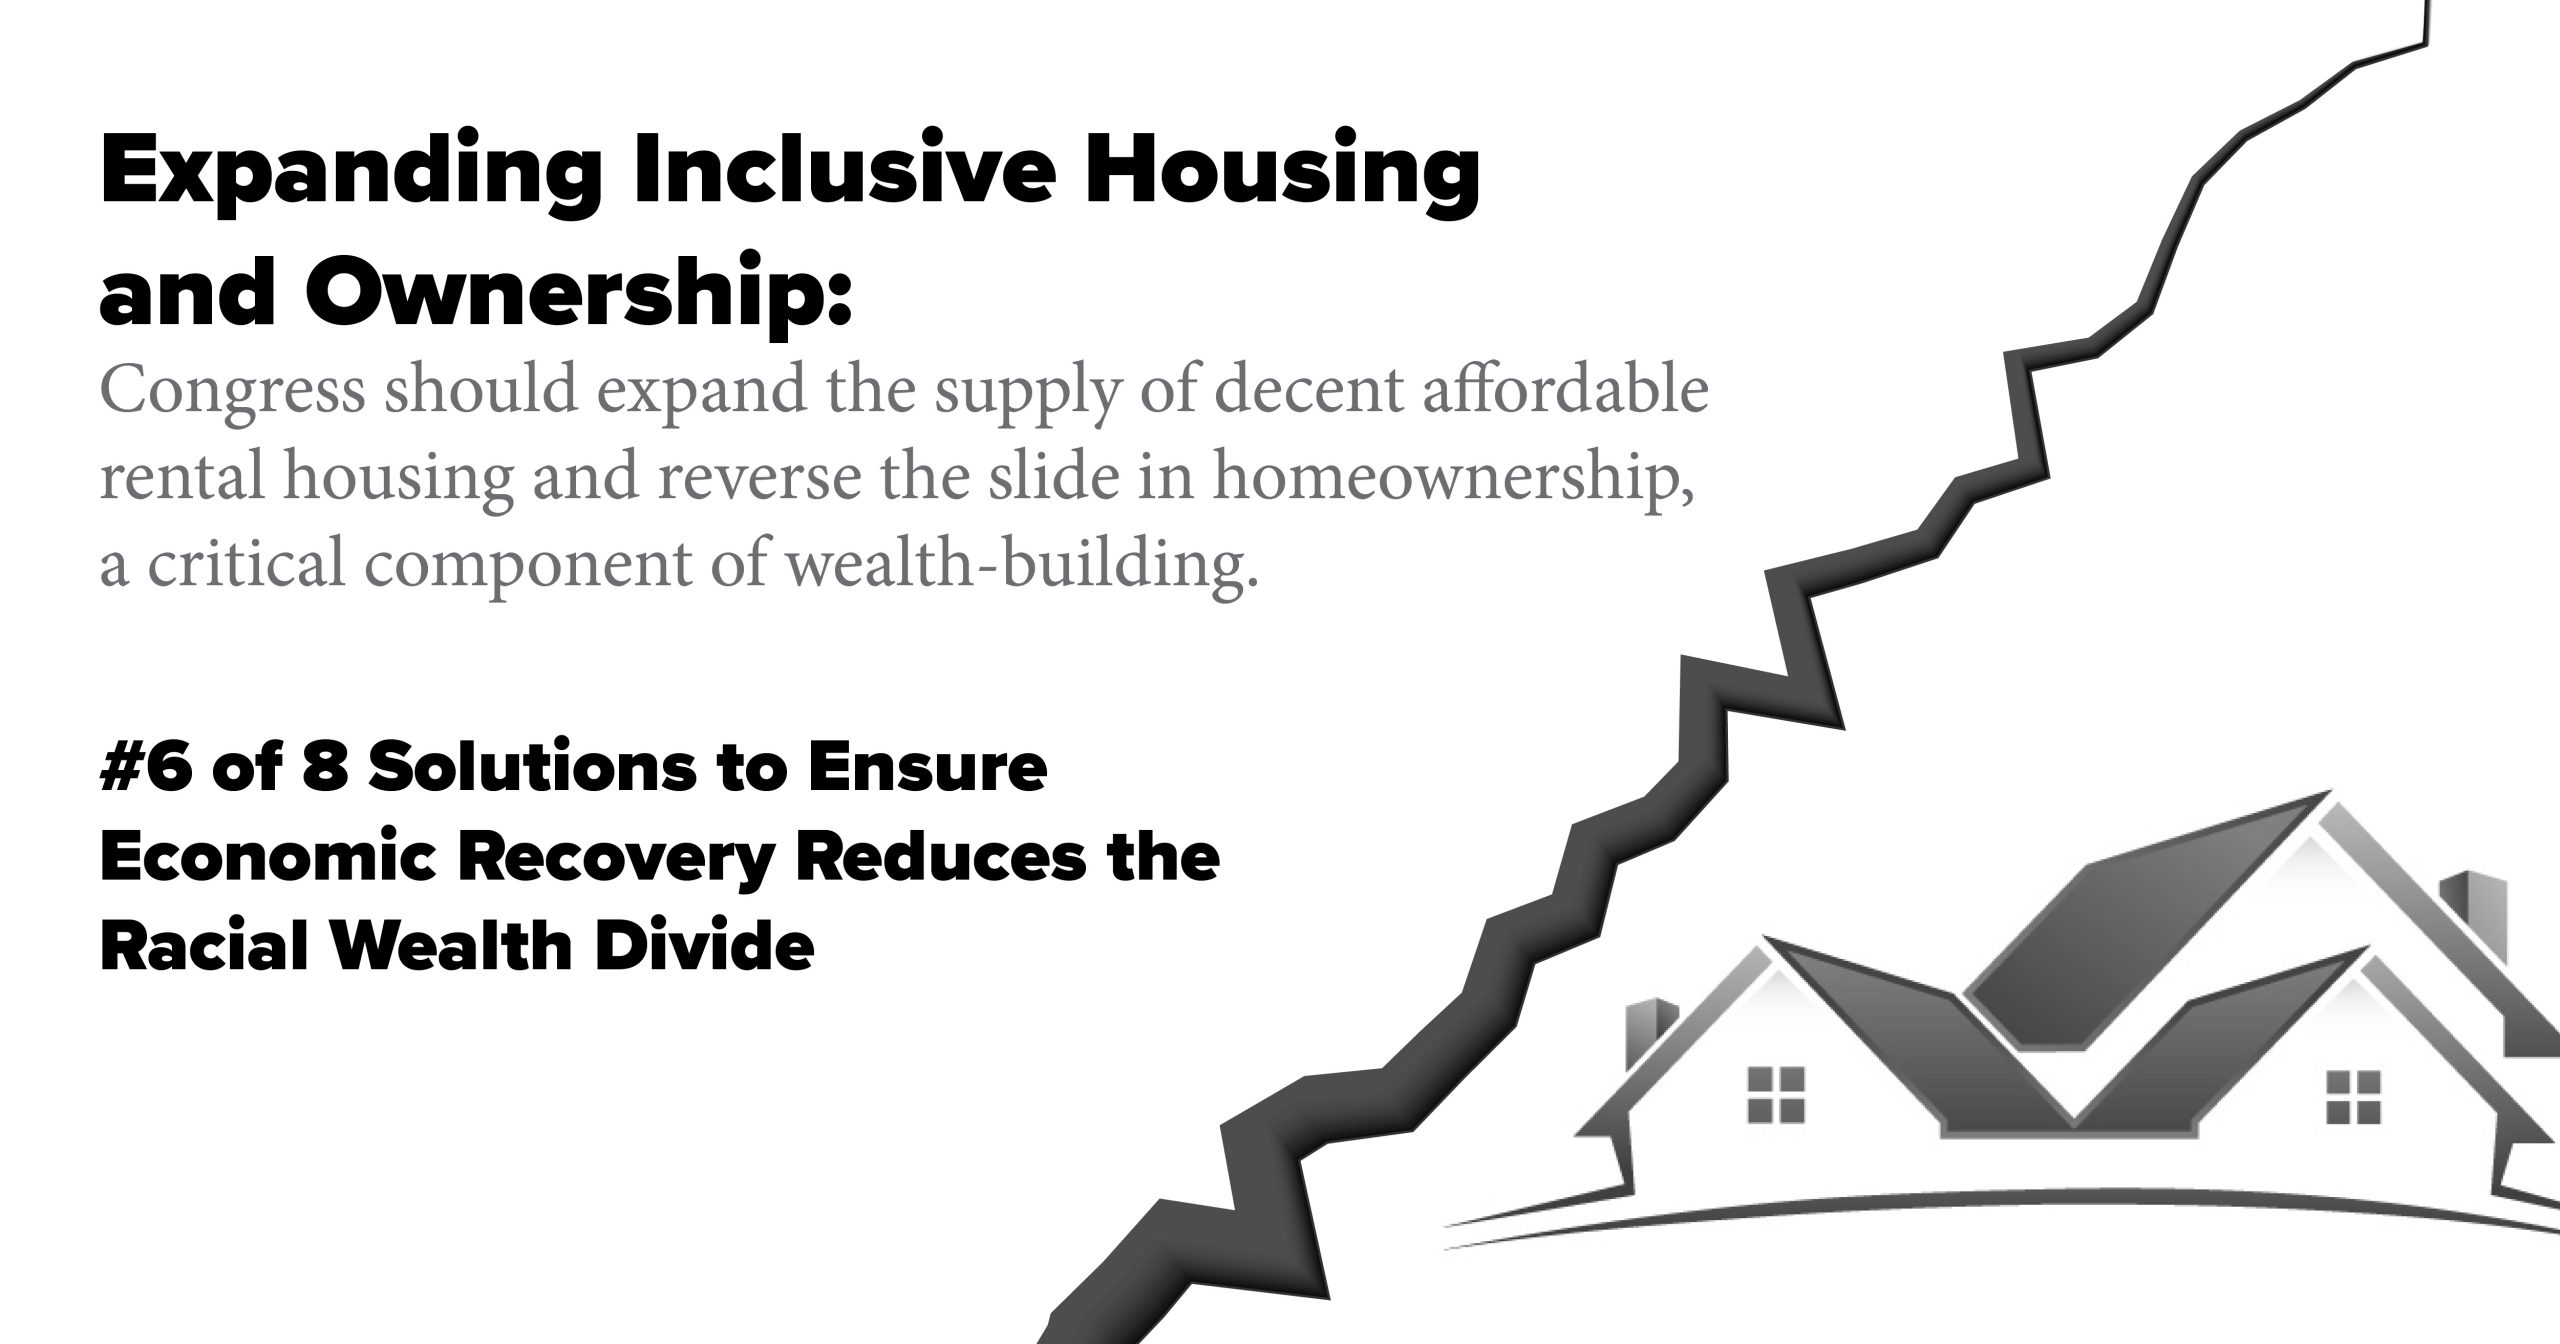 Expanding Inclusive Housing and Ownership. Congress should expand the supply of decent affordable rental housing and reverse the slide in homeownership, a critical component of wealth-building.